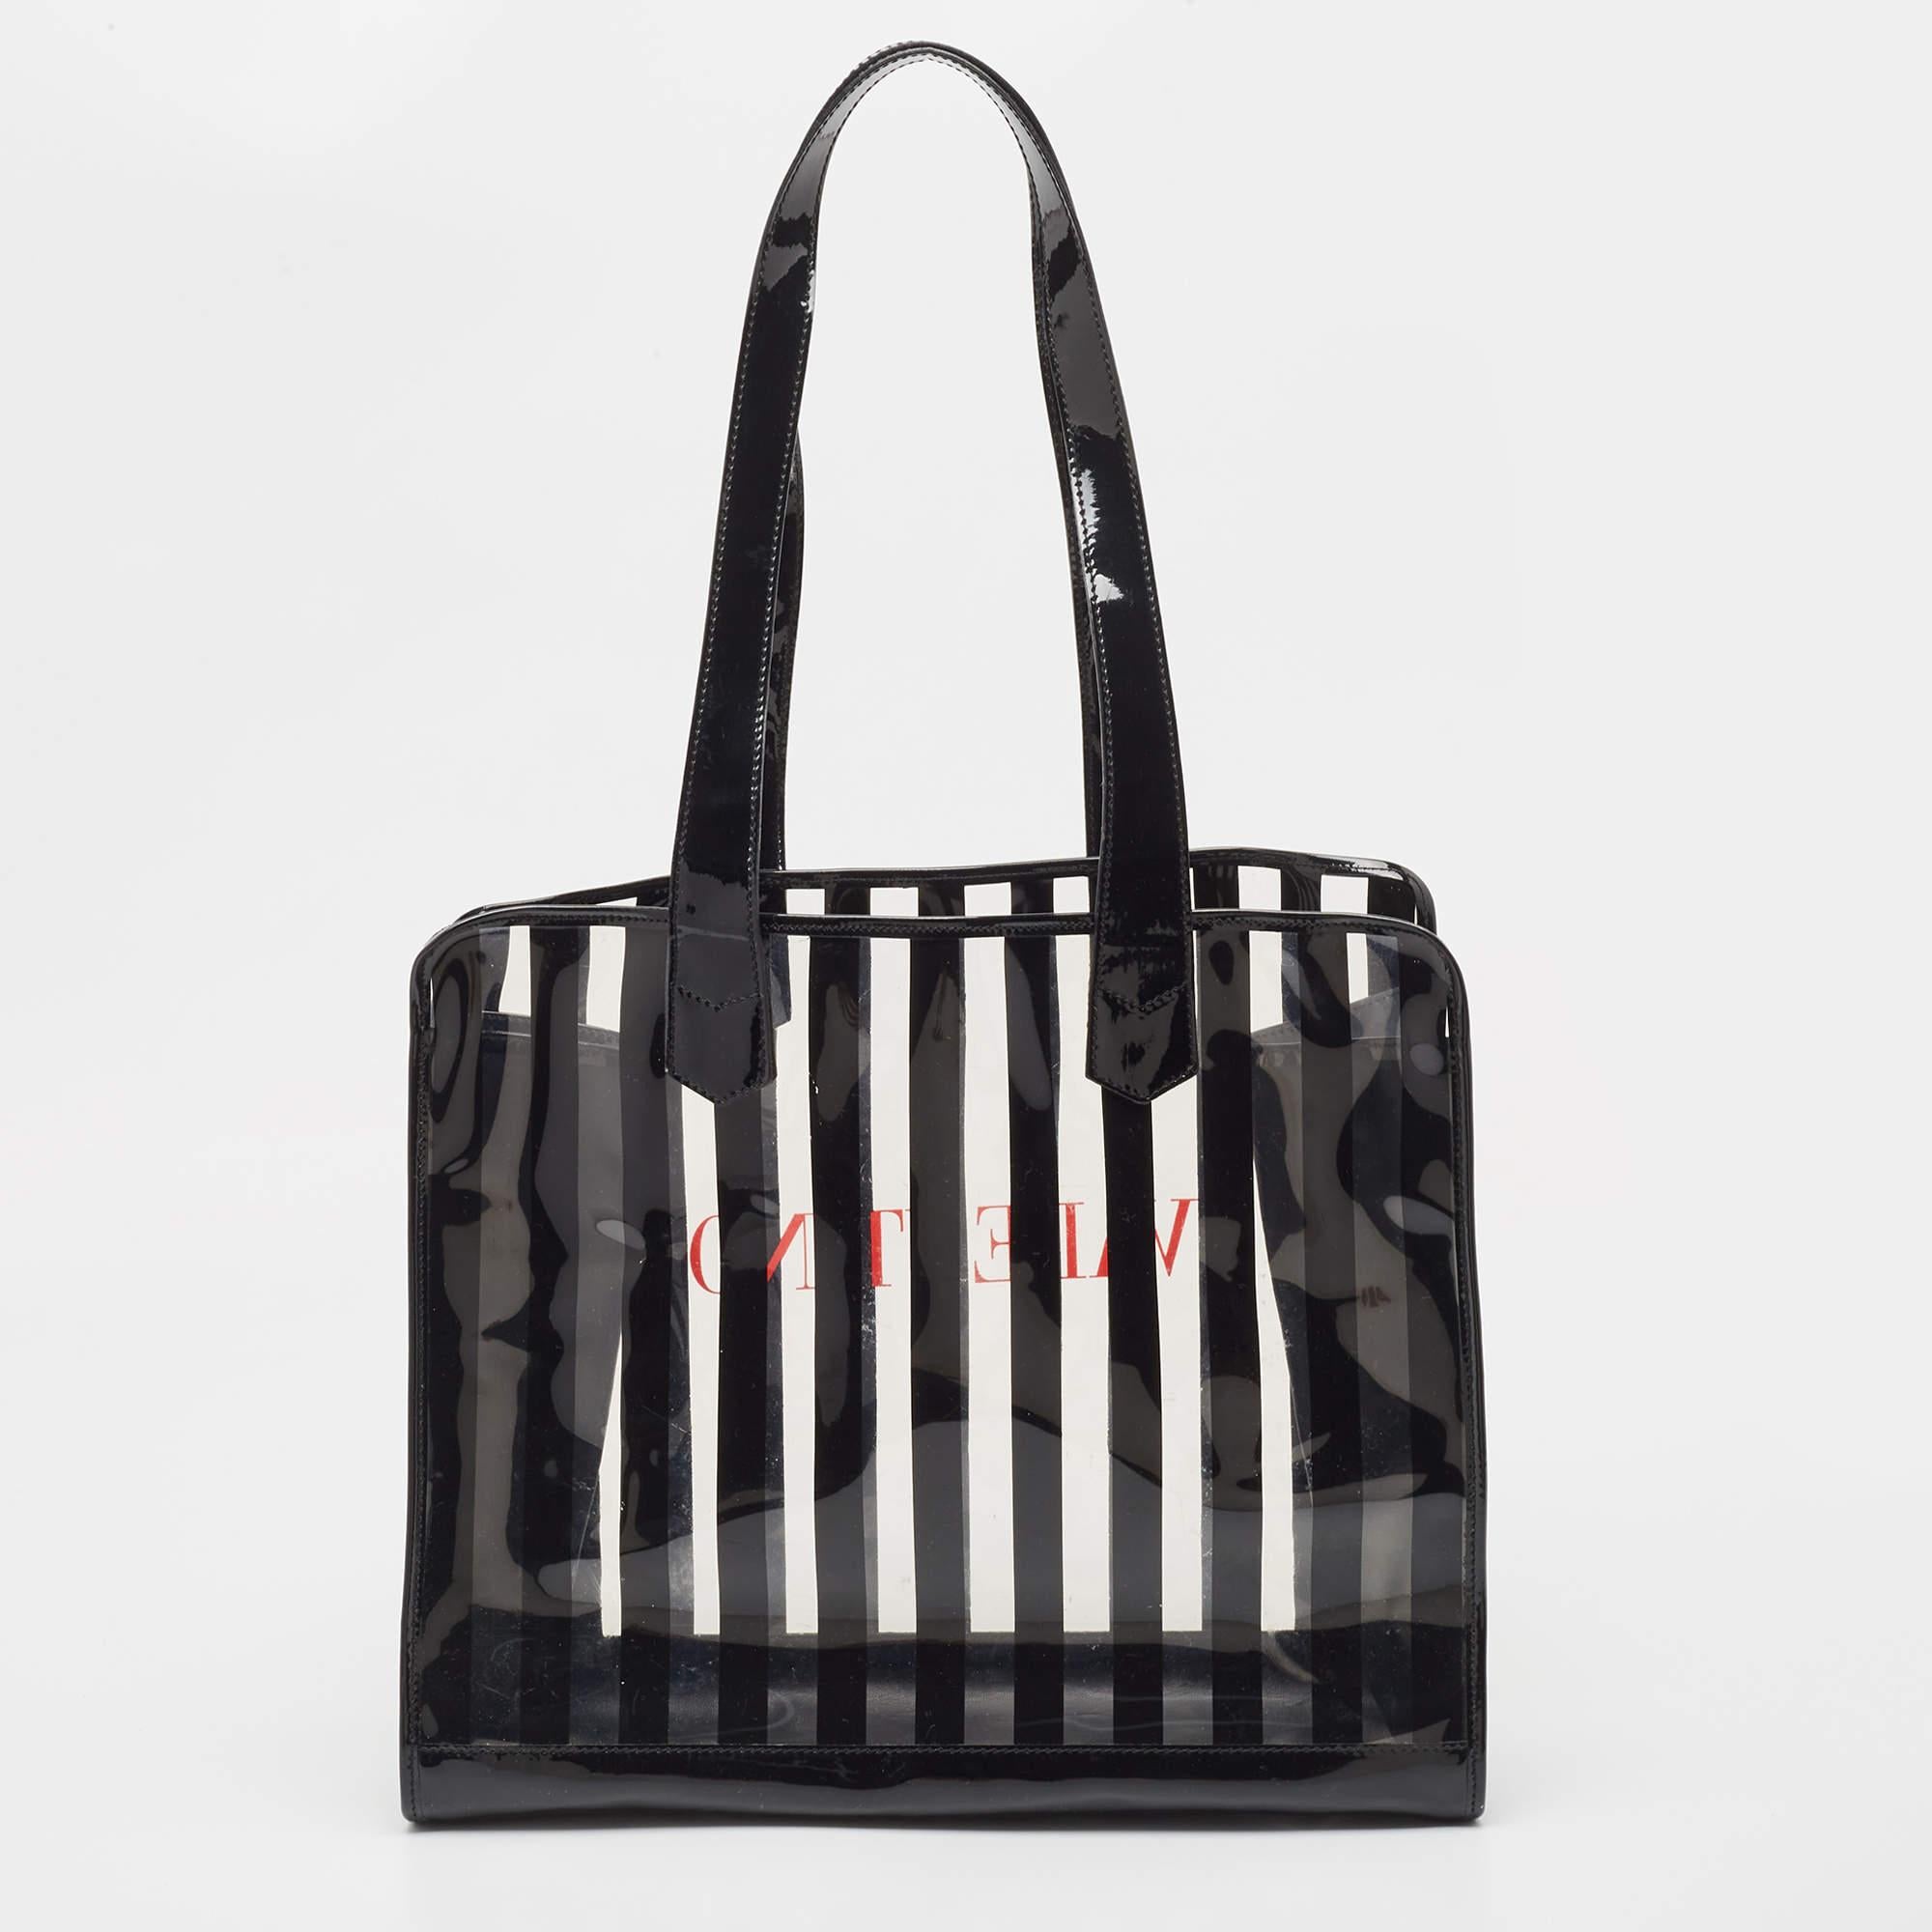 Thoughtful details, high quality, and everyday convenience mark this designer bag for women by Valentino. The bag is sewn with skill to deliver a refined look and an impeccable finish.

Includes: Price Tag